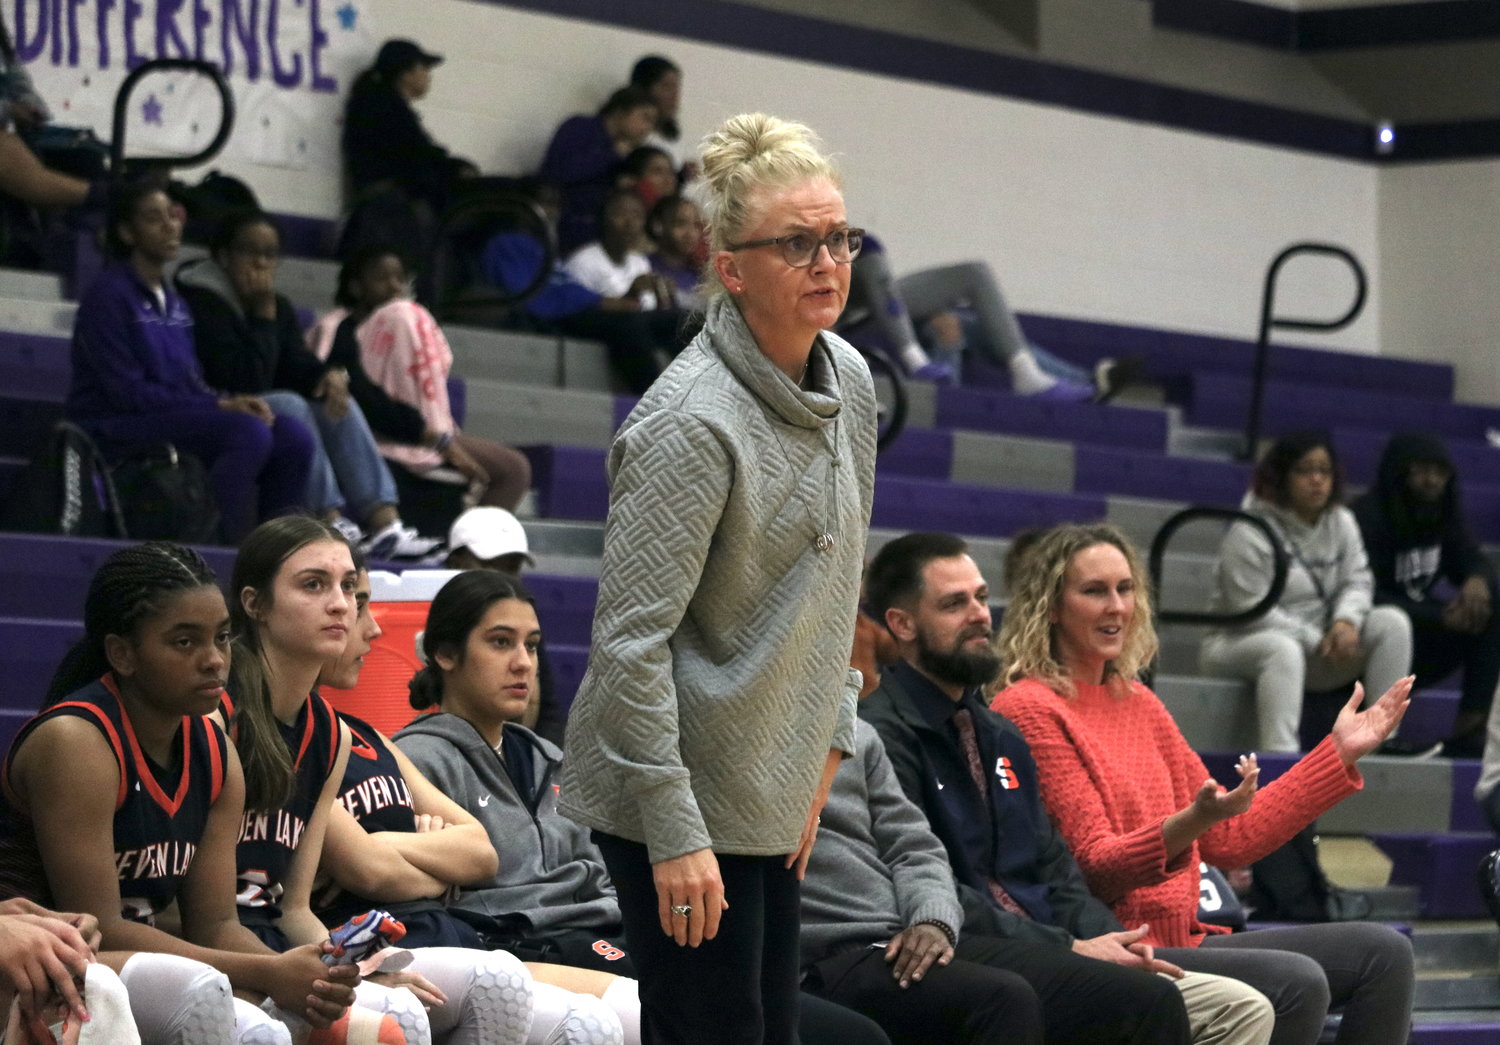 Seven Lakes head coach Angela Spurlock talks to her team during Friday's game between Seven Lakes and Morton Ranch at the Morton Ranch gym.